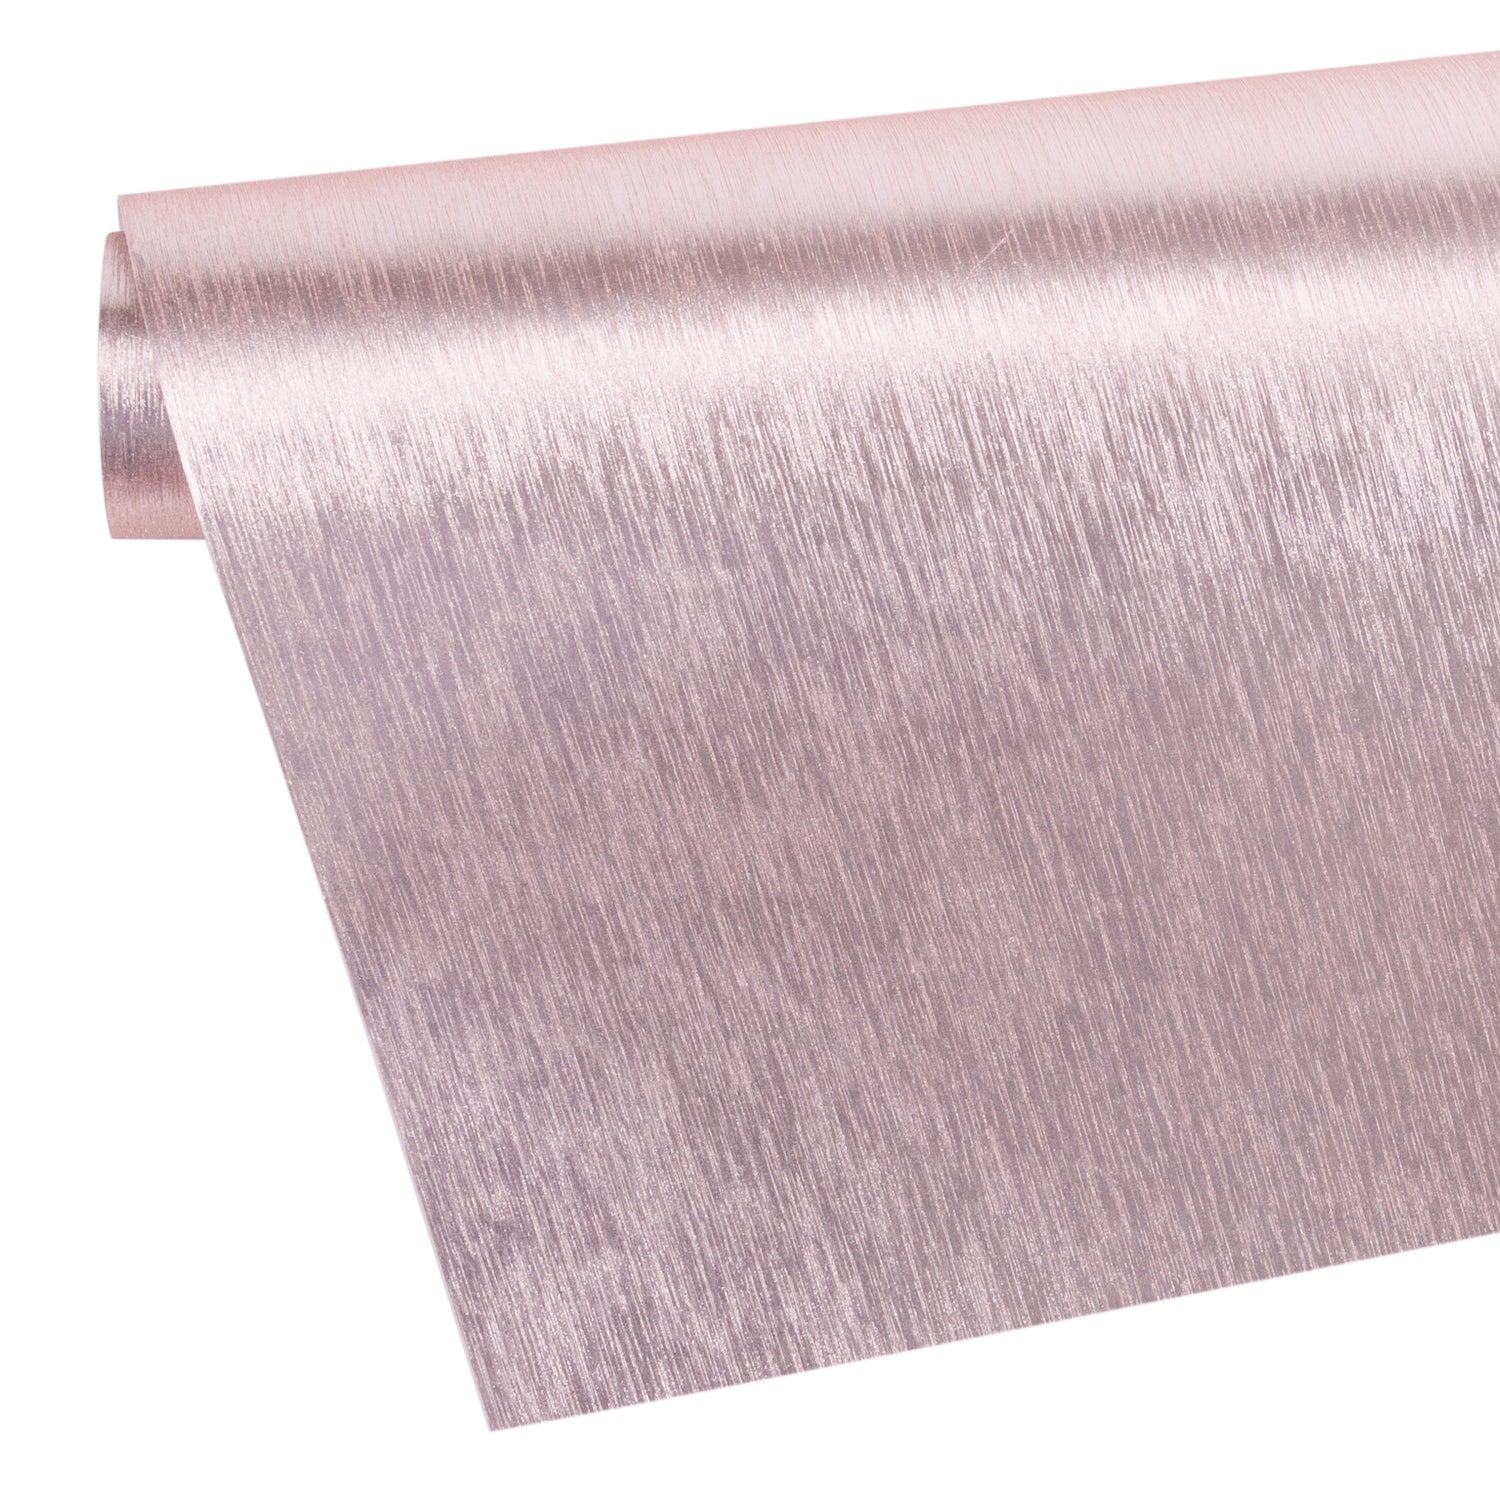 Brushed Aluminum Texture Metallic Wrapping Paper Roll Pink Ream Wholesale Wraphaholic